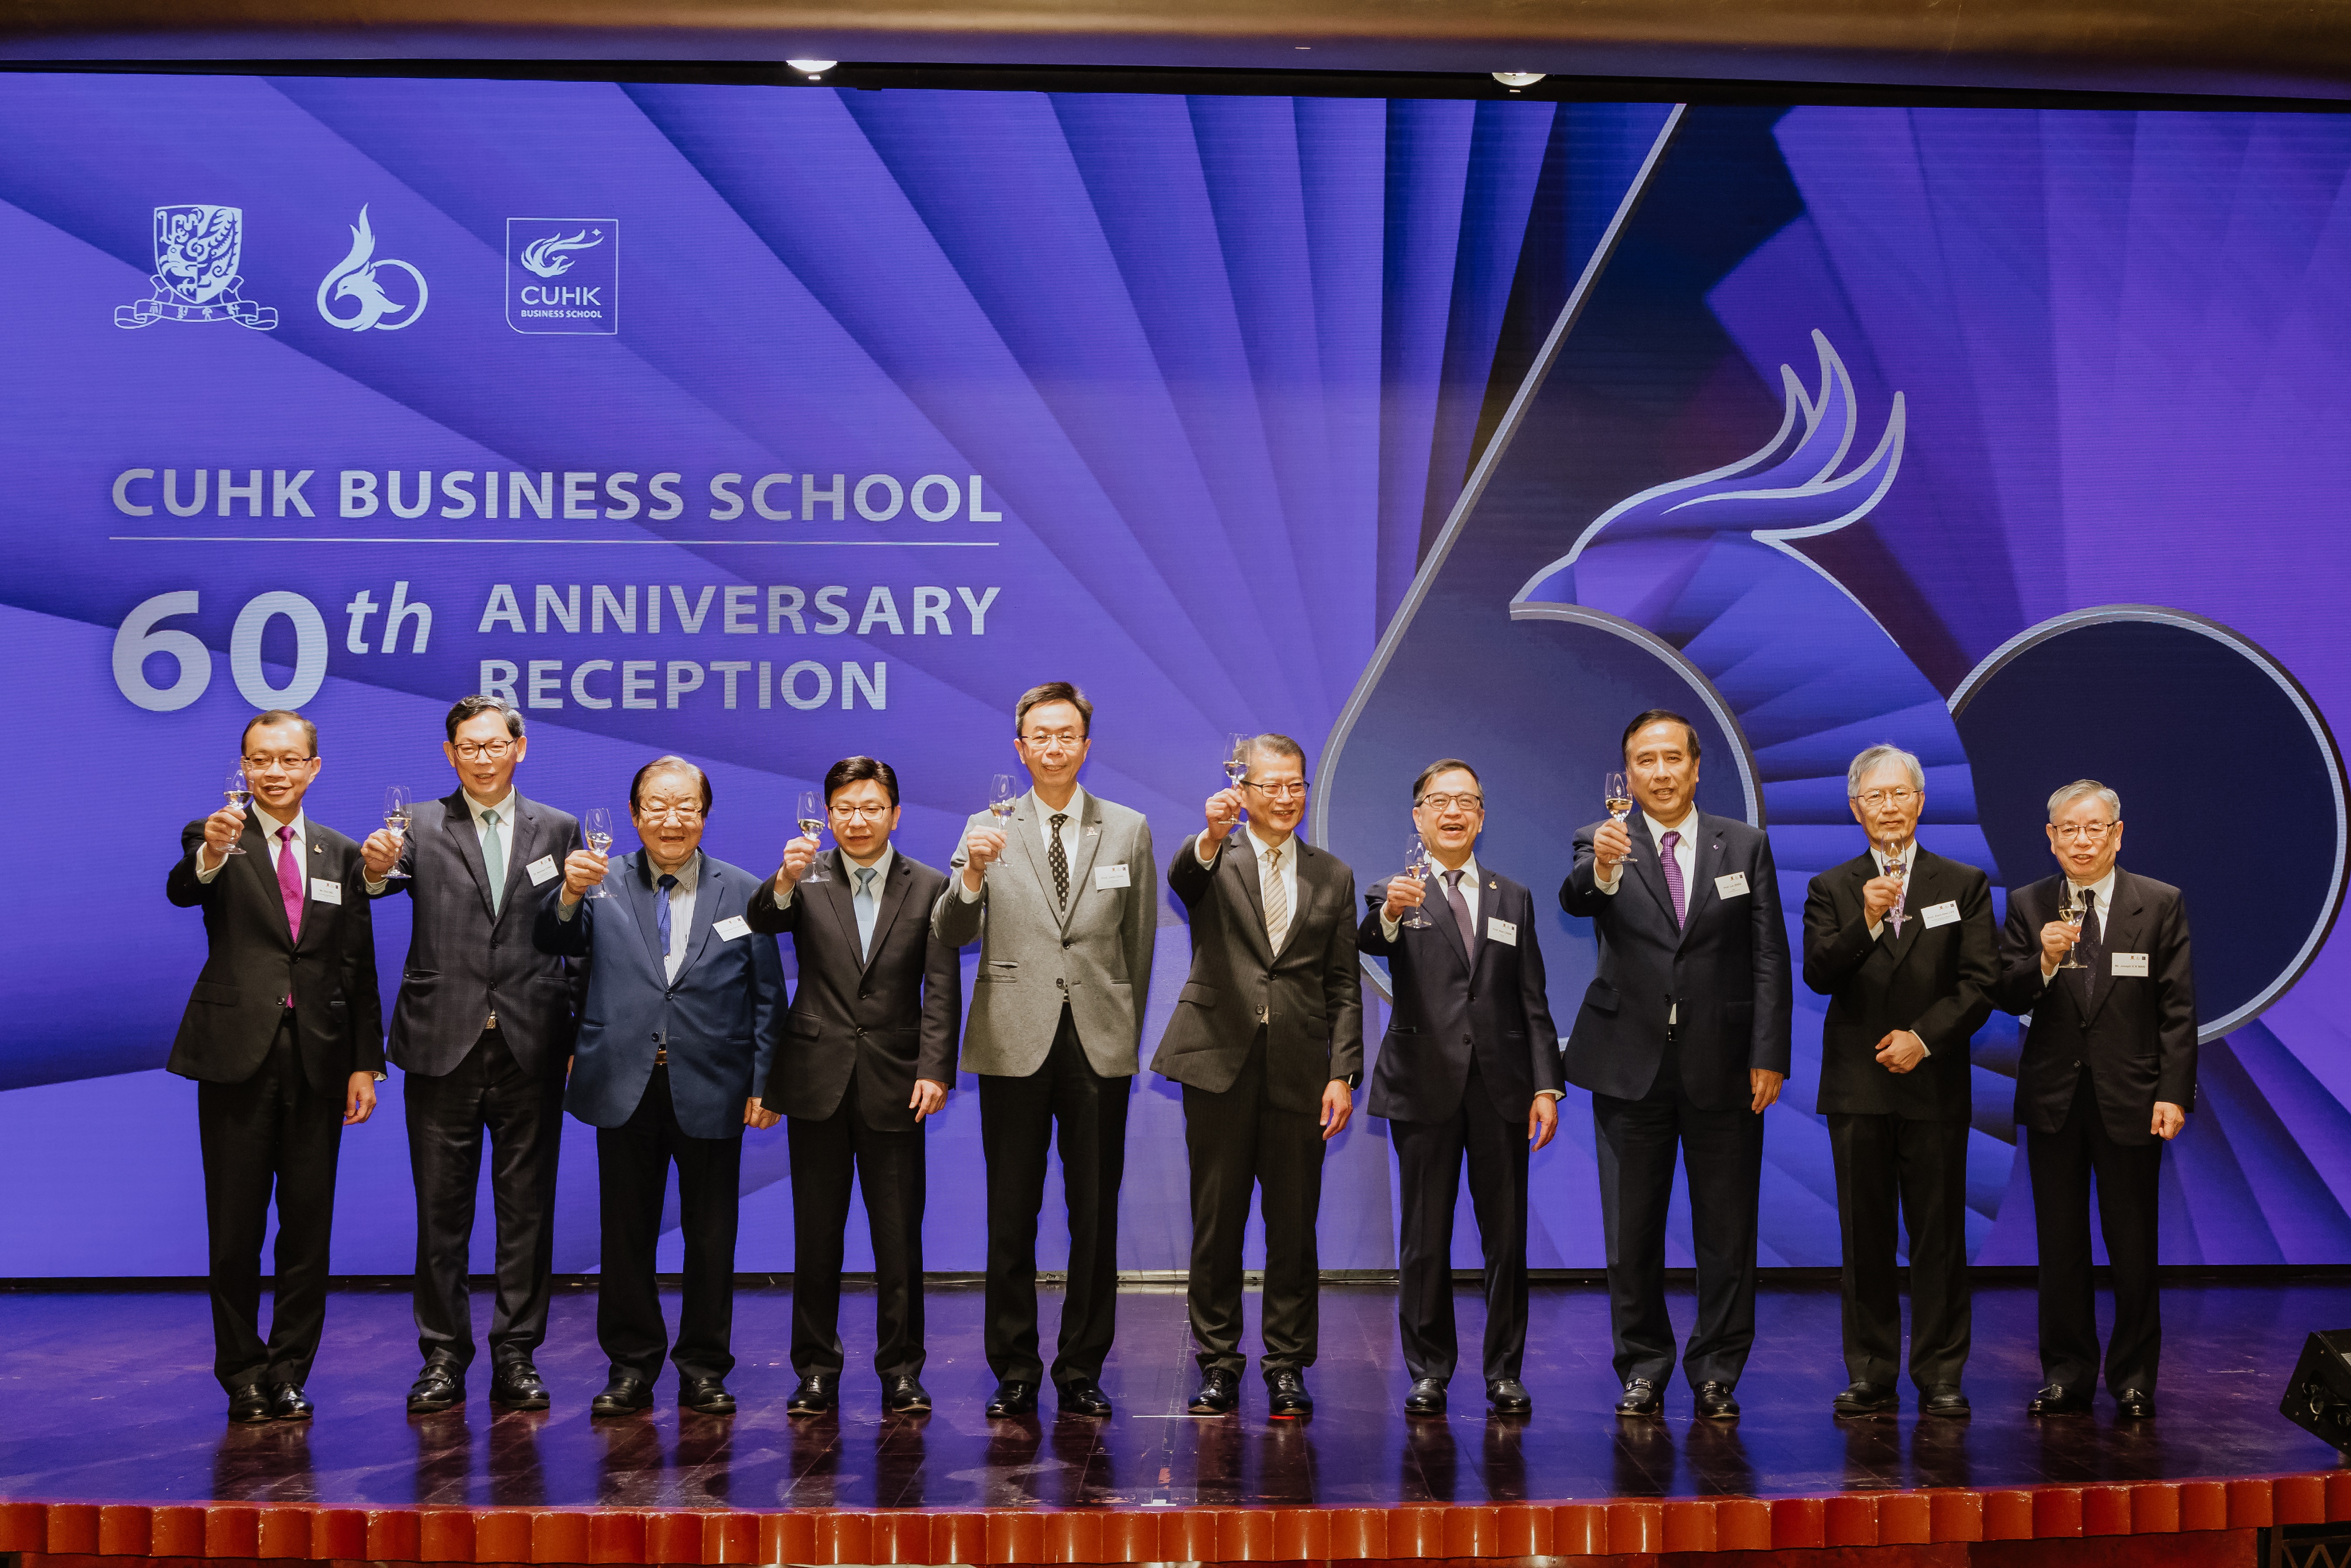 (From left) Mr Eric Ng, Vice-President (Administration) and University Secretary of CUHK, Dr Norman Chan, Honourary Professor of CUHK, Professor Ambrose King, Former Vice-Chancellor of CUHK, Mr Chris Sun, Secretary for Labour and Welfare, Professor John Chai Yat-chiu, Chairman of CUHK Council, Mr Paul Chan Mo-po, Financial Secretary, Professor Alan Chan, Provost of CUHK, Professor Zhou Lin, Dean of CUHK Business School, Professor Lee Kam-hon, Emeritus Professor and Former Dean of CUHK Business School and Mr Joseph Man Kwok-kei, Graduate from the 1st Cohort of CUHK MBA Programme, officiated at the CUHK Business School 60th Anniversary Reception.